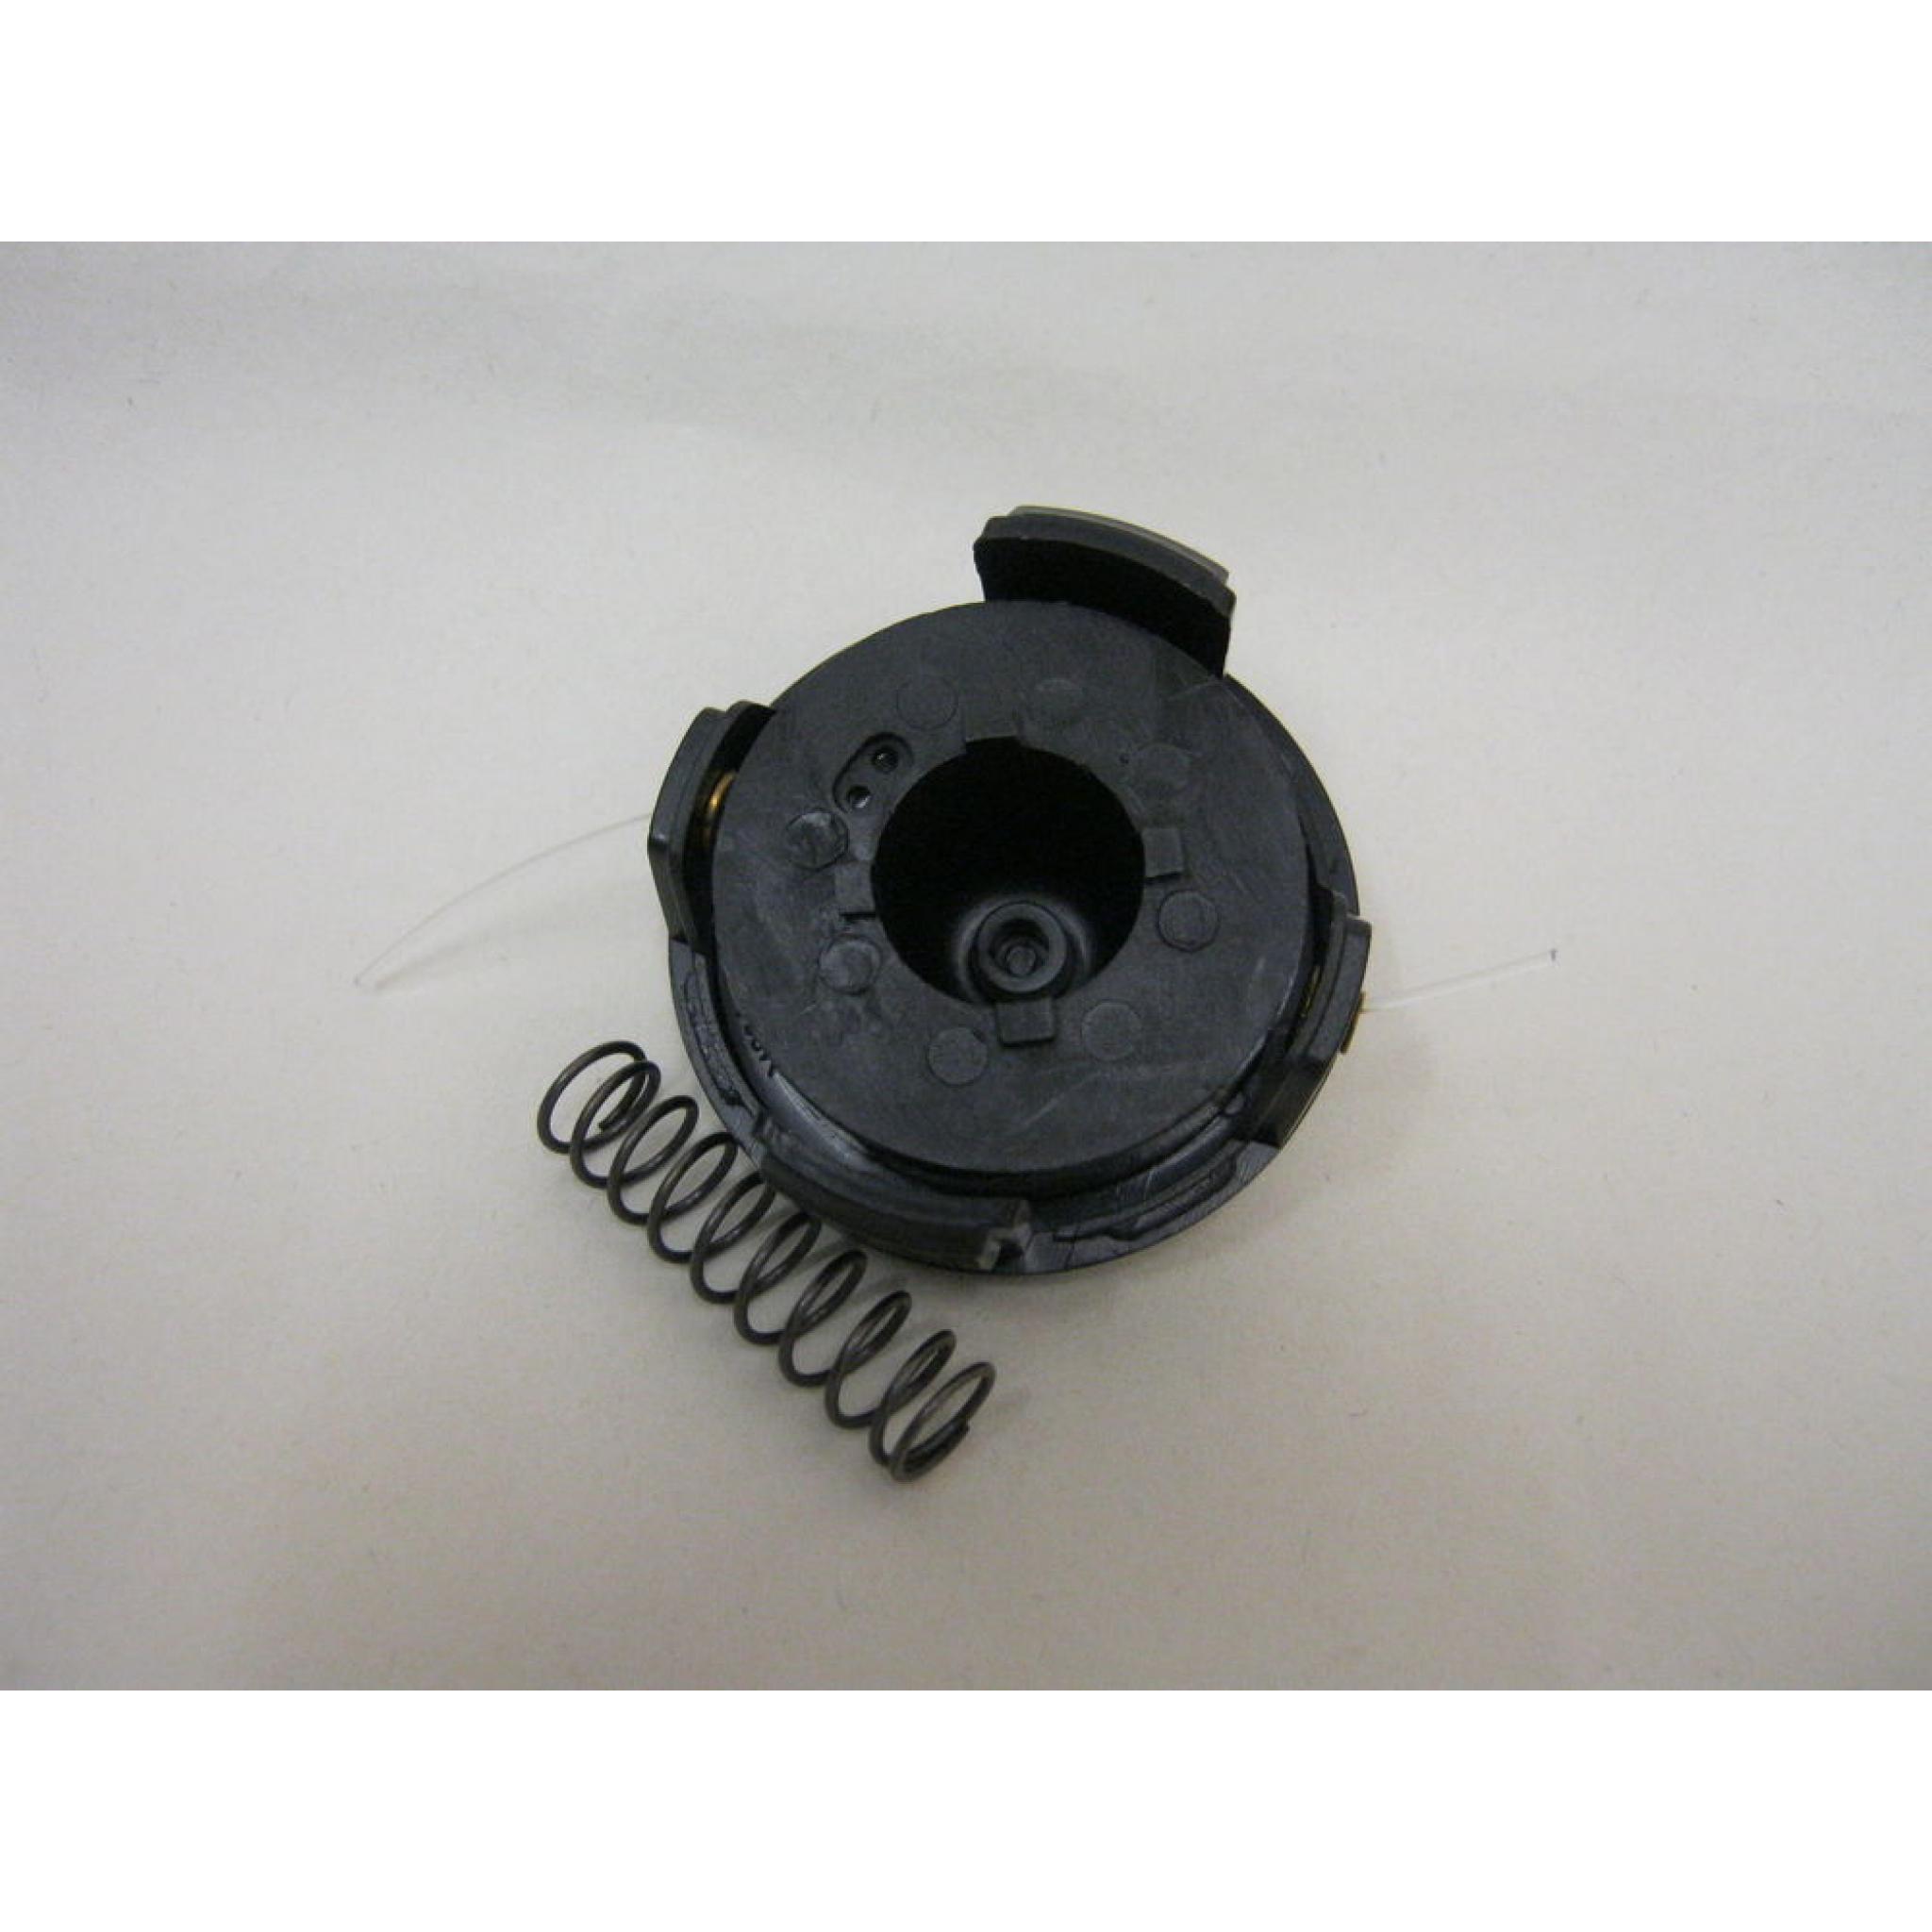 New ALM Spool Cover Spool And Spring To Fit Cotech Trimmers  PD451 